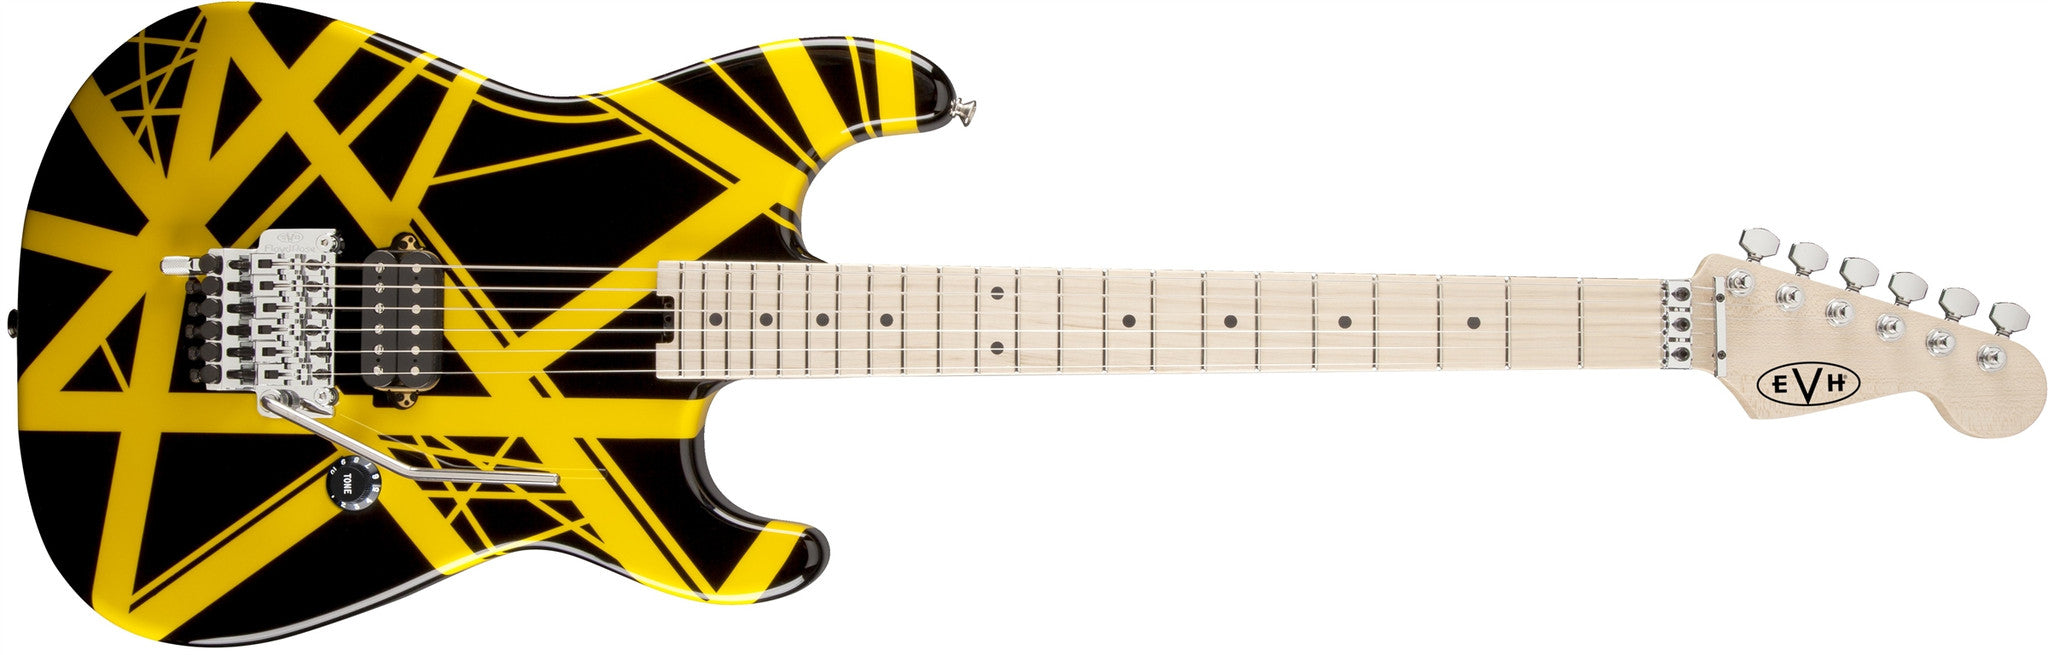 EVH Striped Series Black with Yellow Stripes 5107902528 - L.A. Music - Canada's Favourite Music Store!